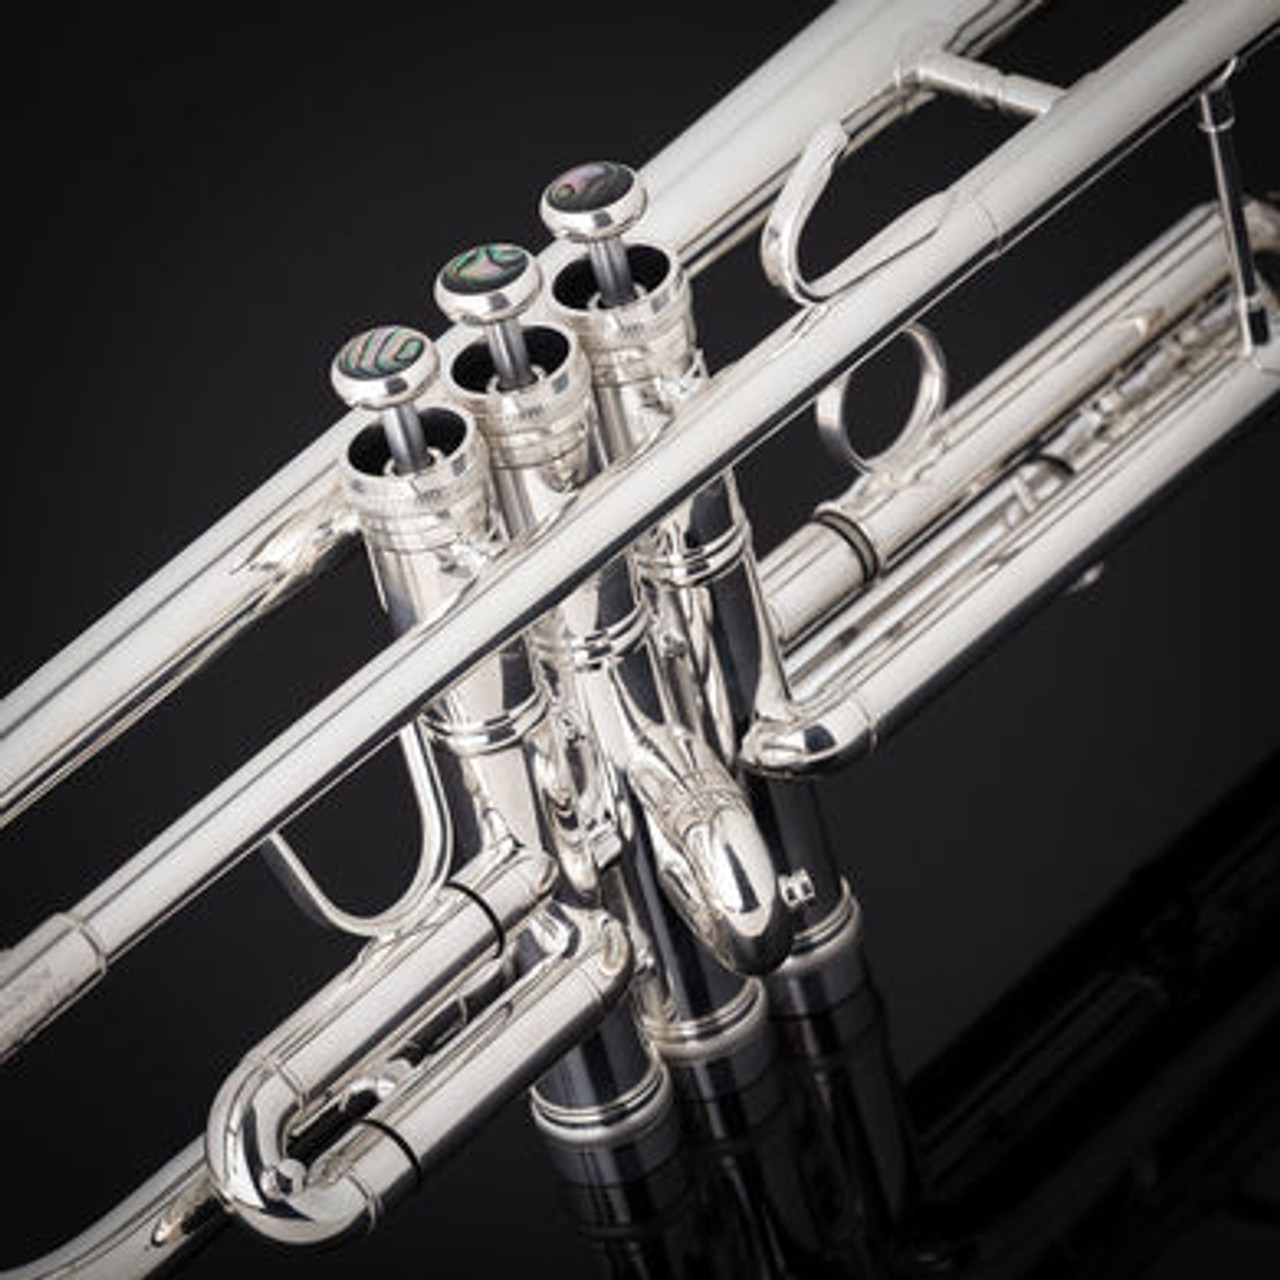 JP 251RSW Smith Watkins Trumpet in Clear Lacquer with Rose Brass Bell